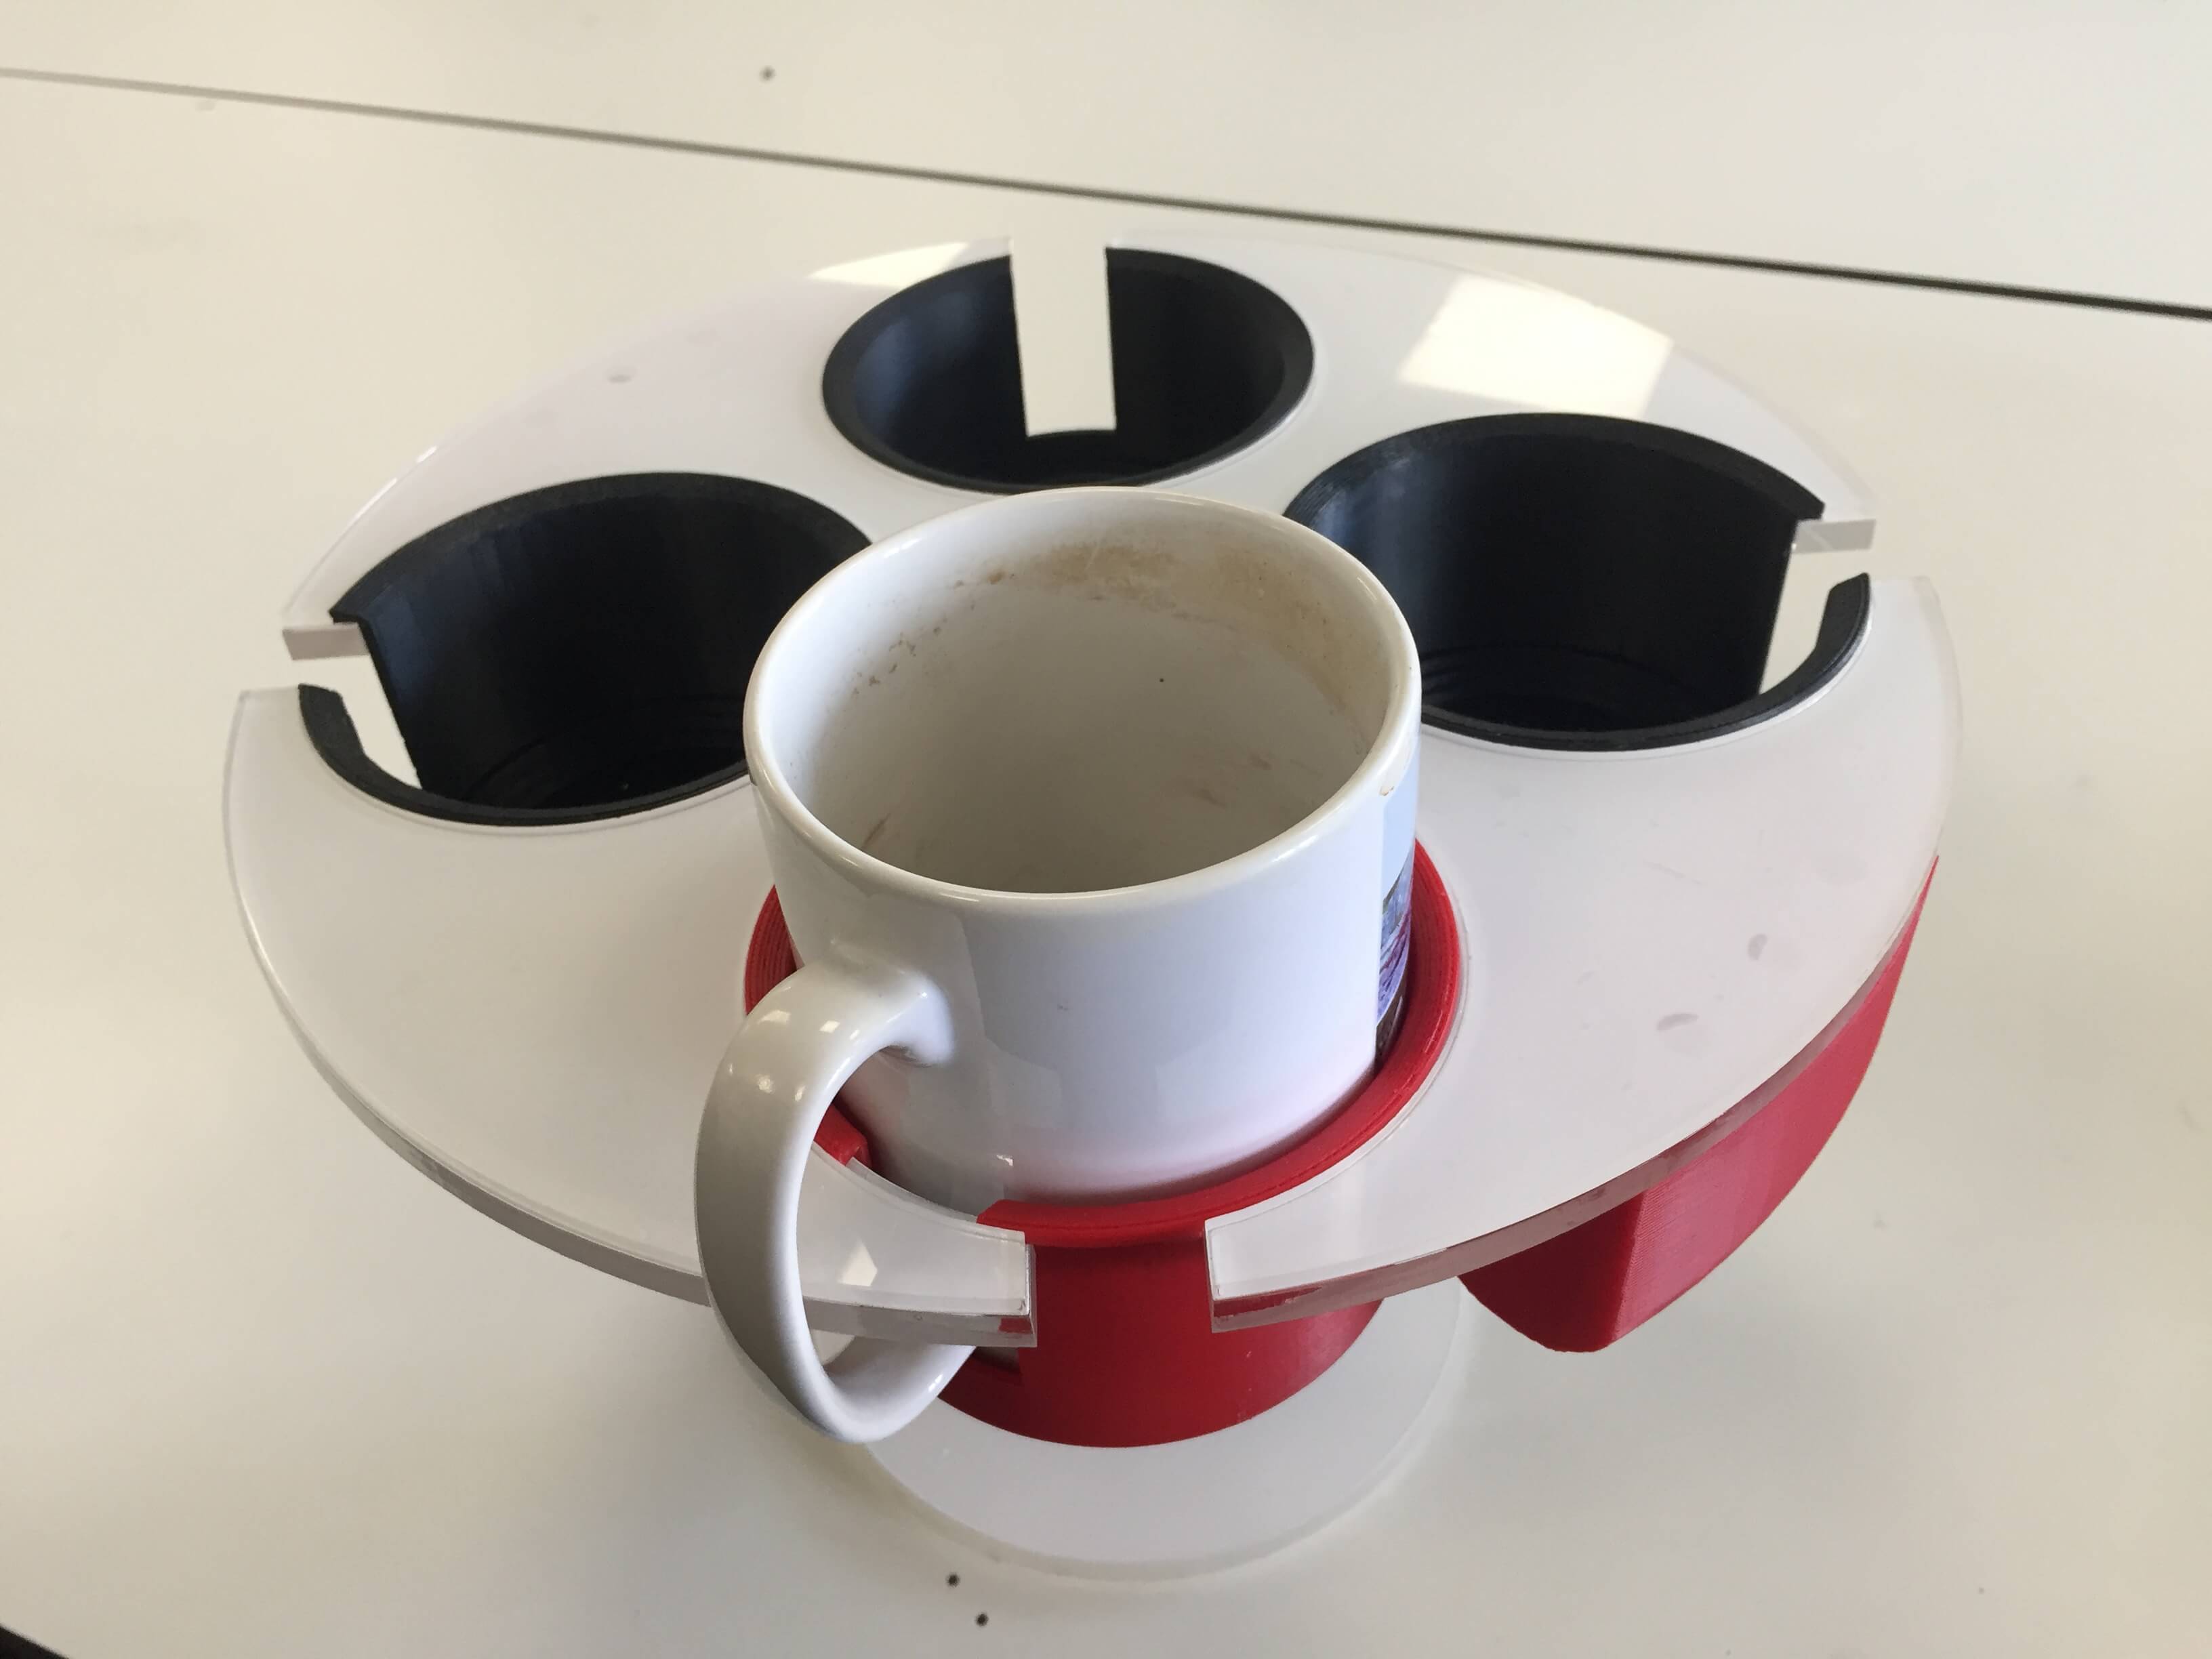 A mug being rotated to lock to the tray